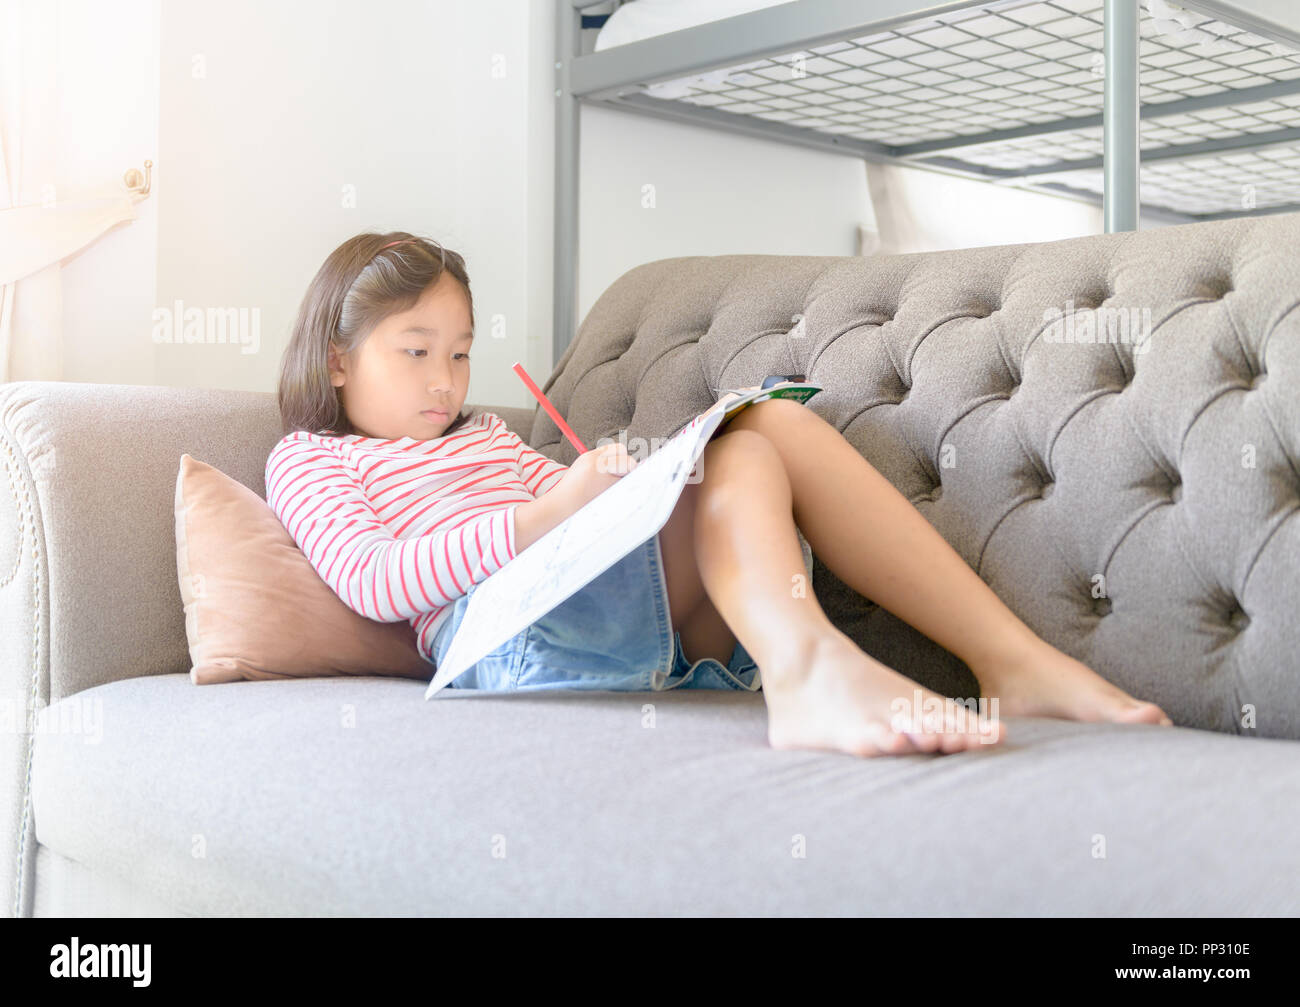 cute girl drawing on sofa in bedroom, education concept Stock Photo